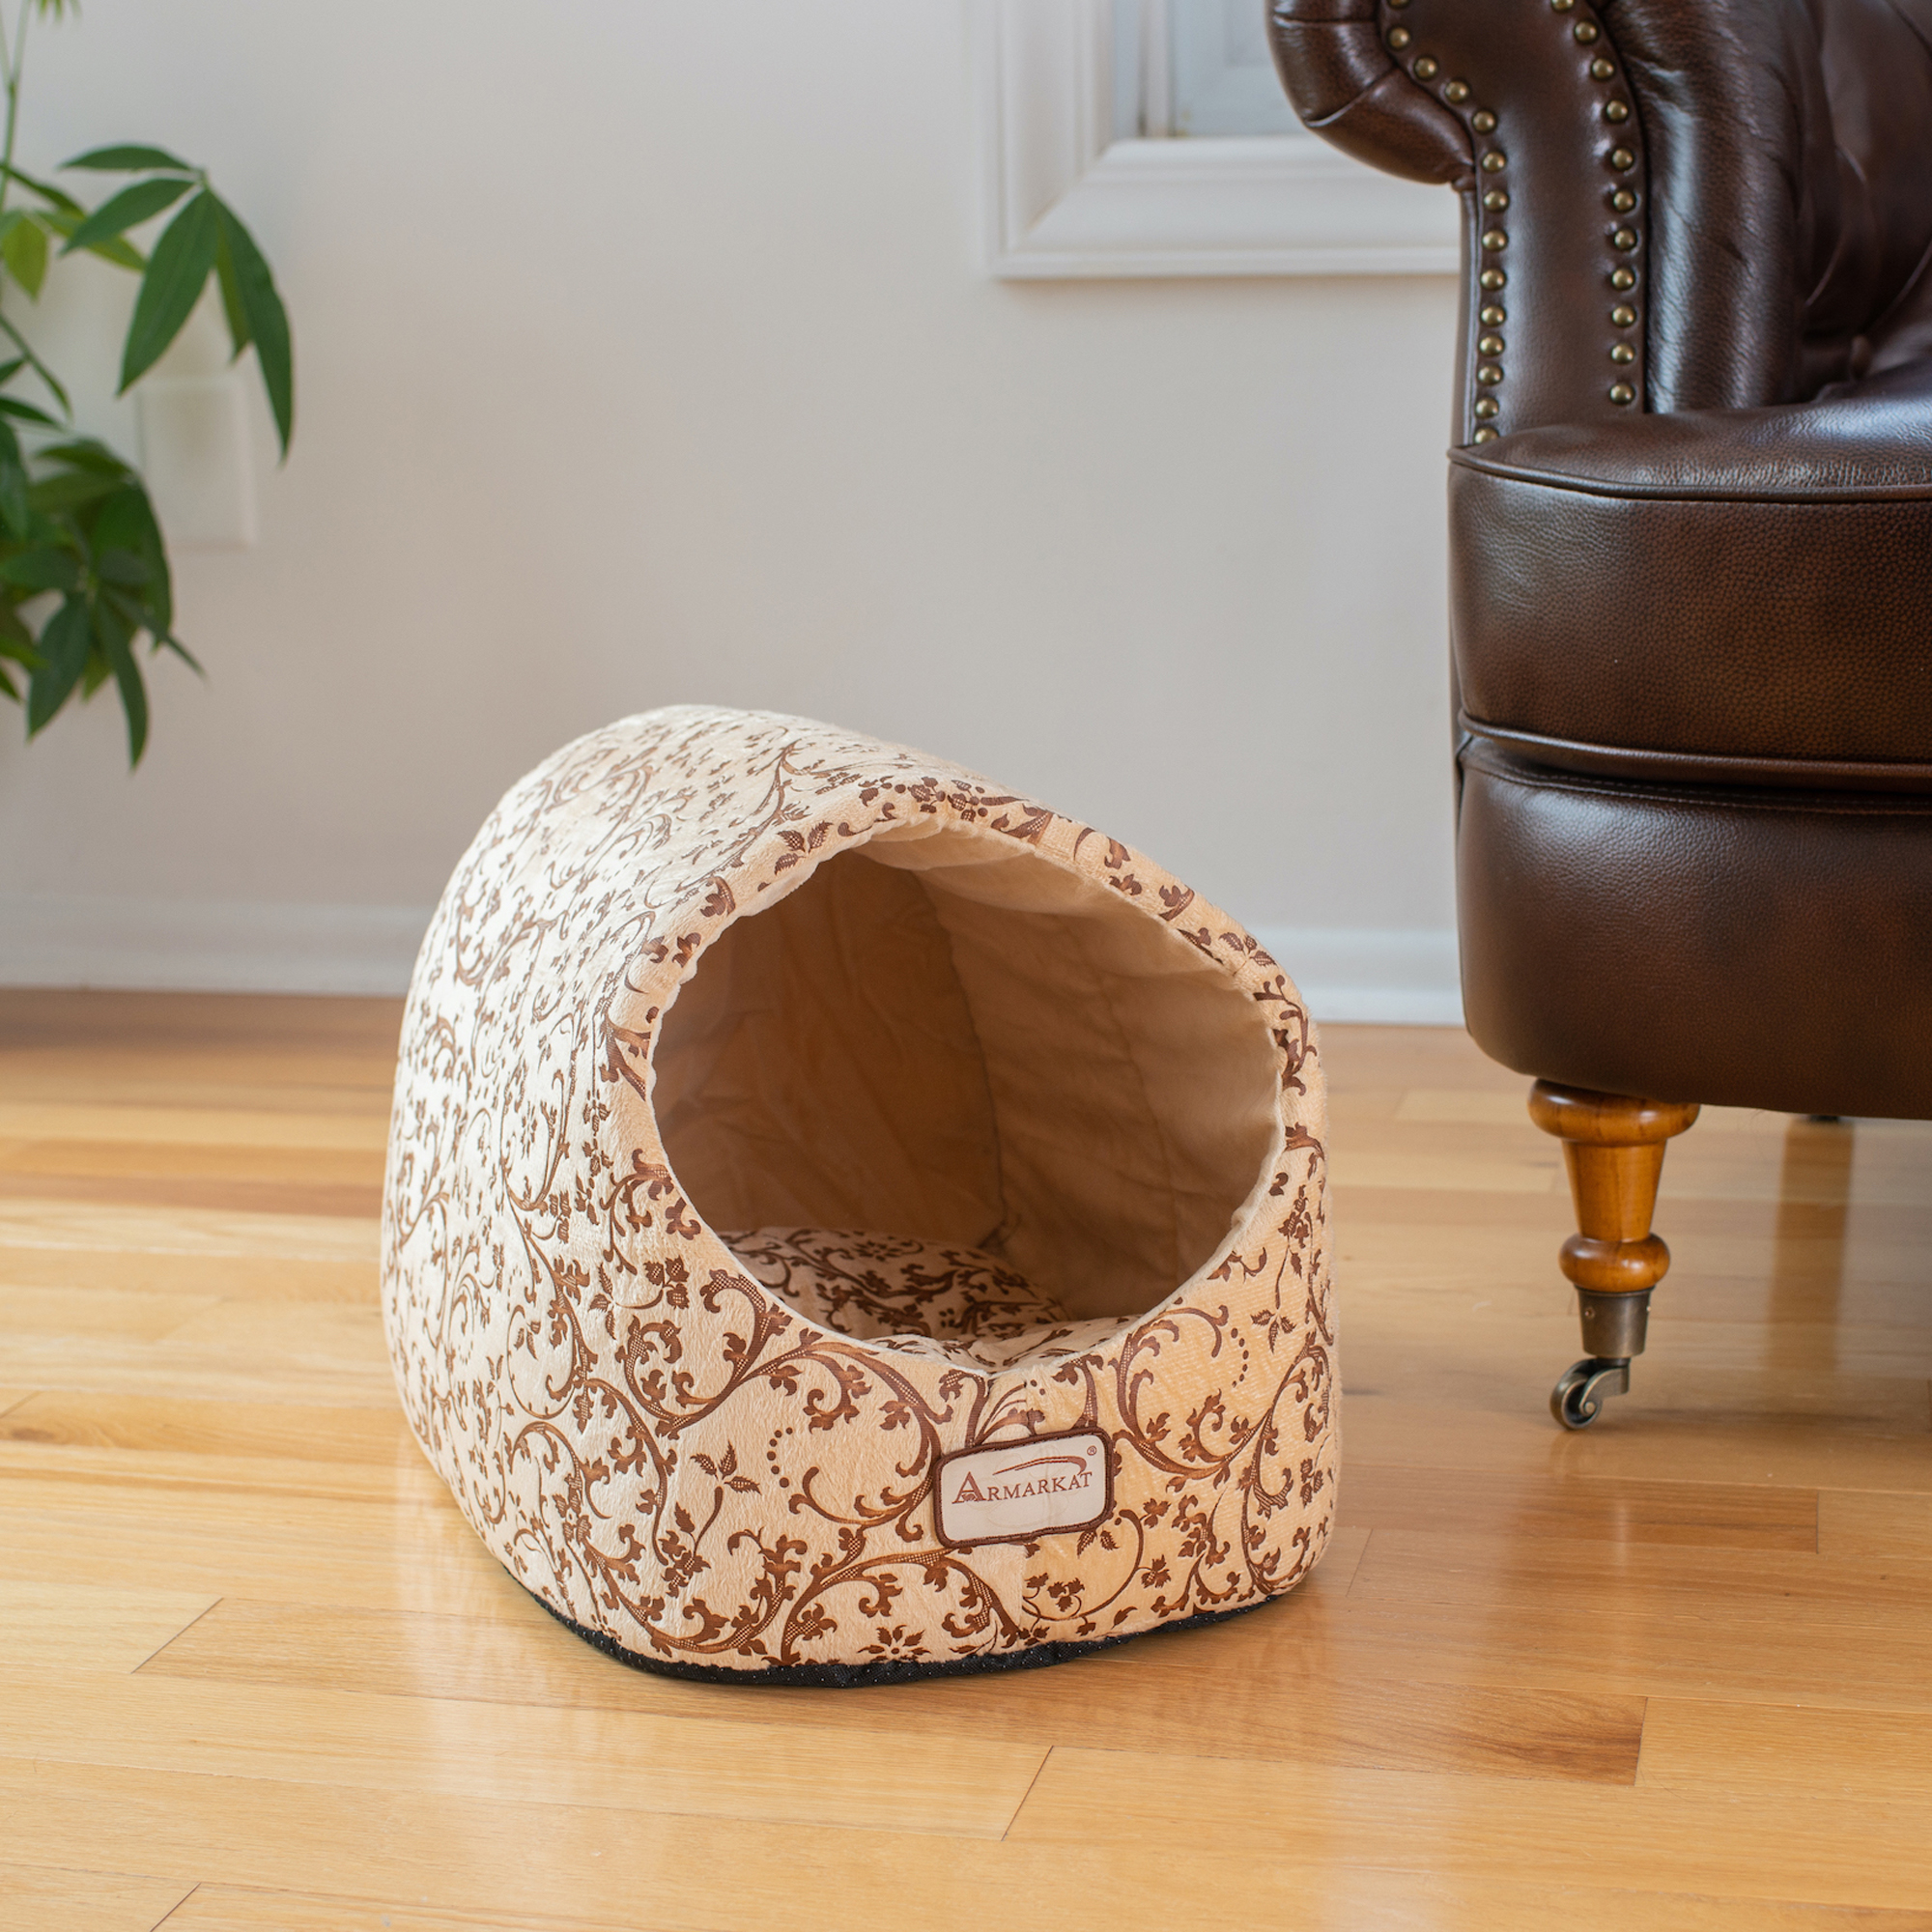 C11hyh-mh Armarkat Cat Bed With Flower Pattern, Beige C11hyh-mh